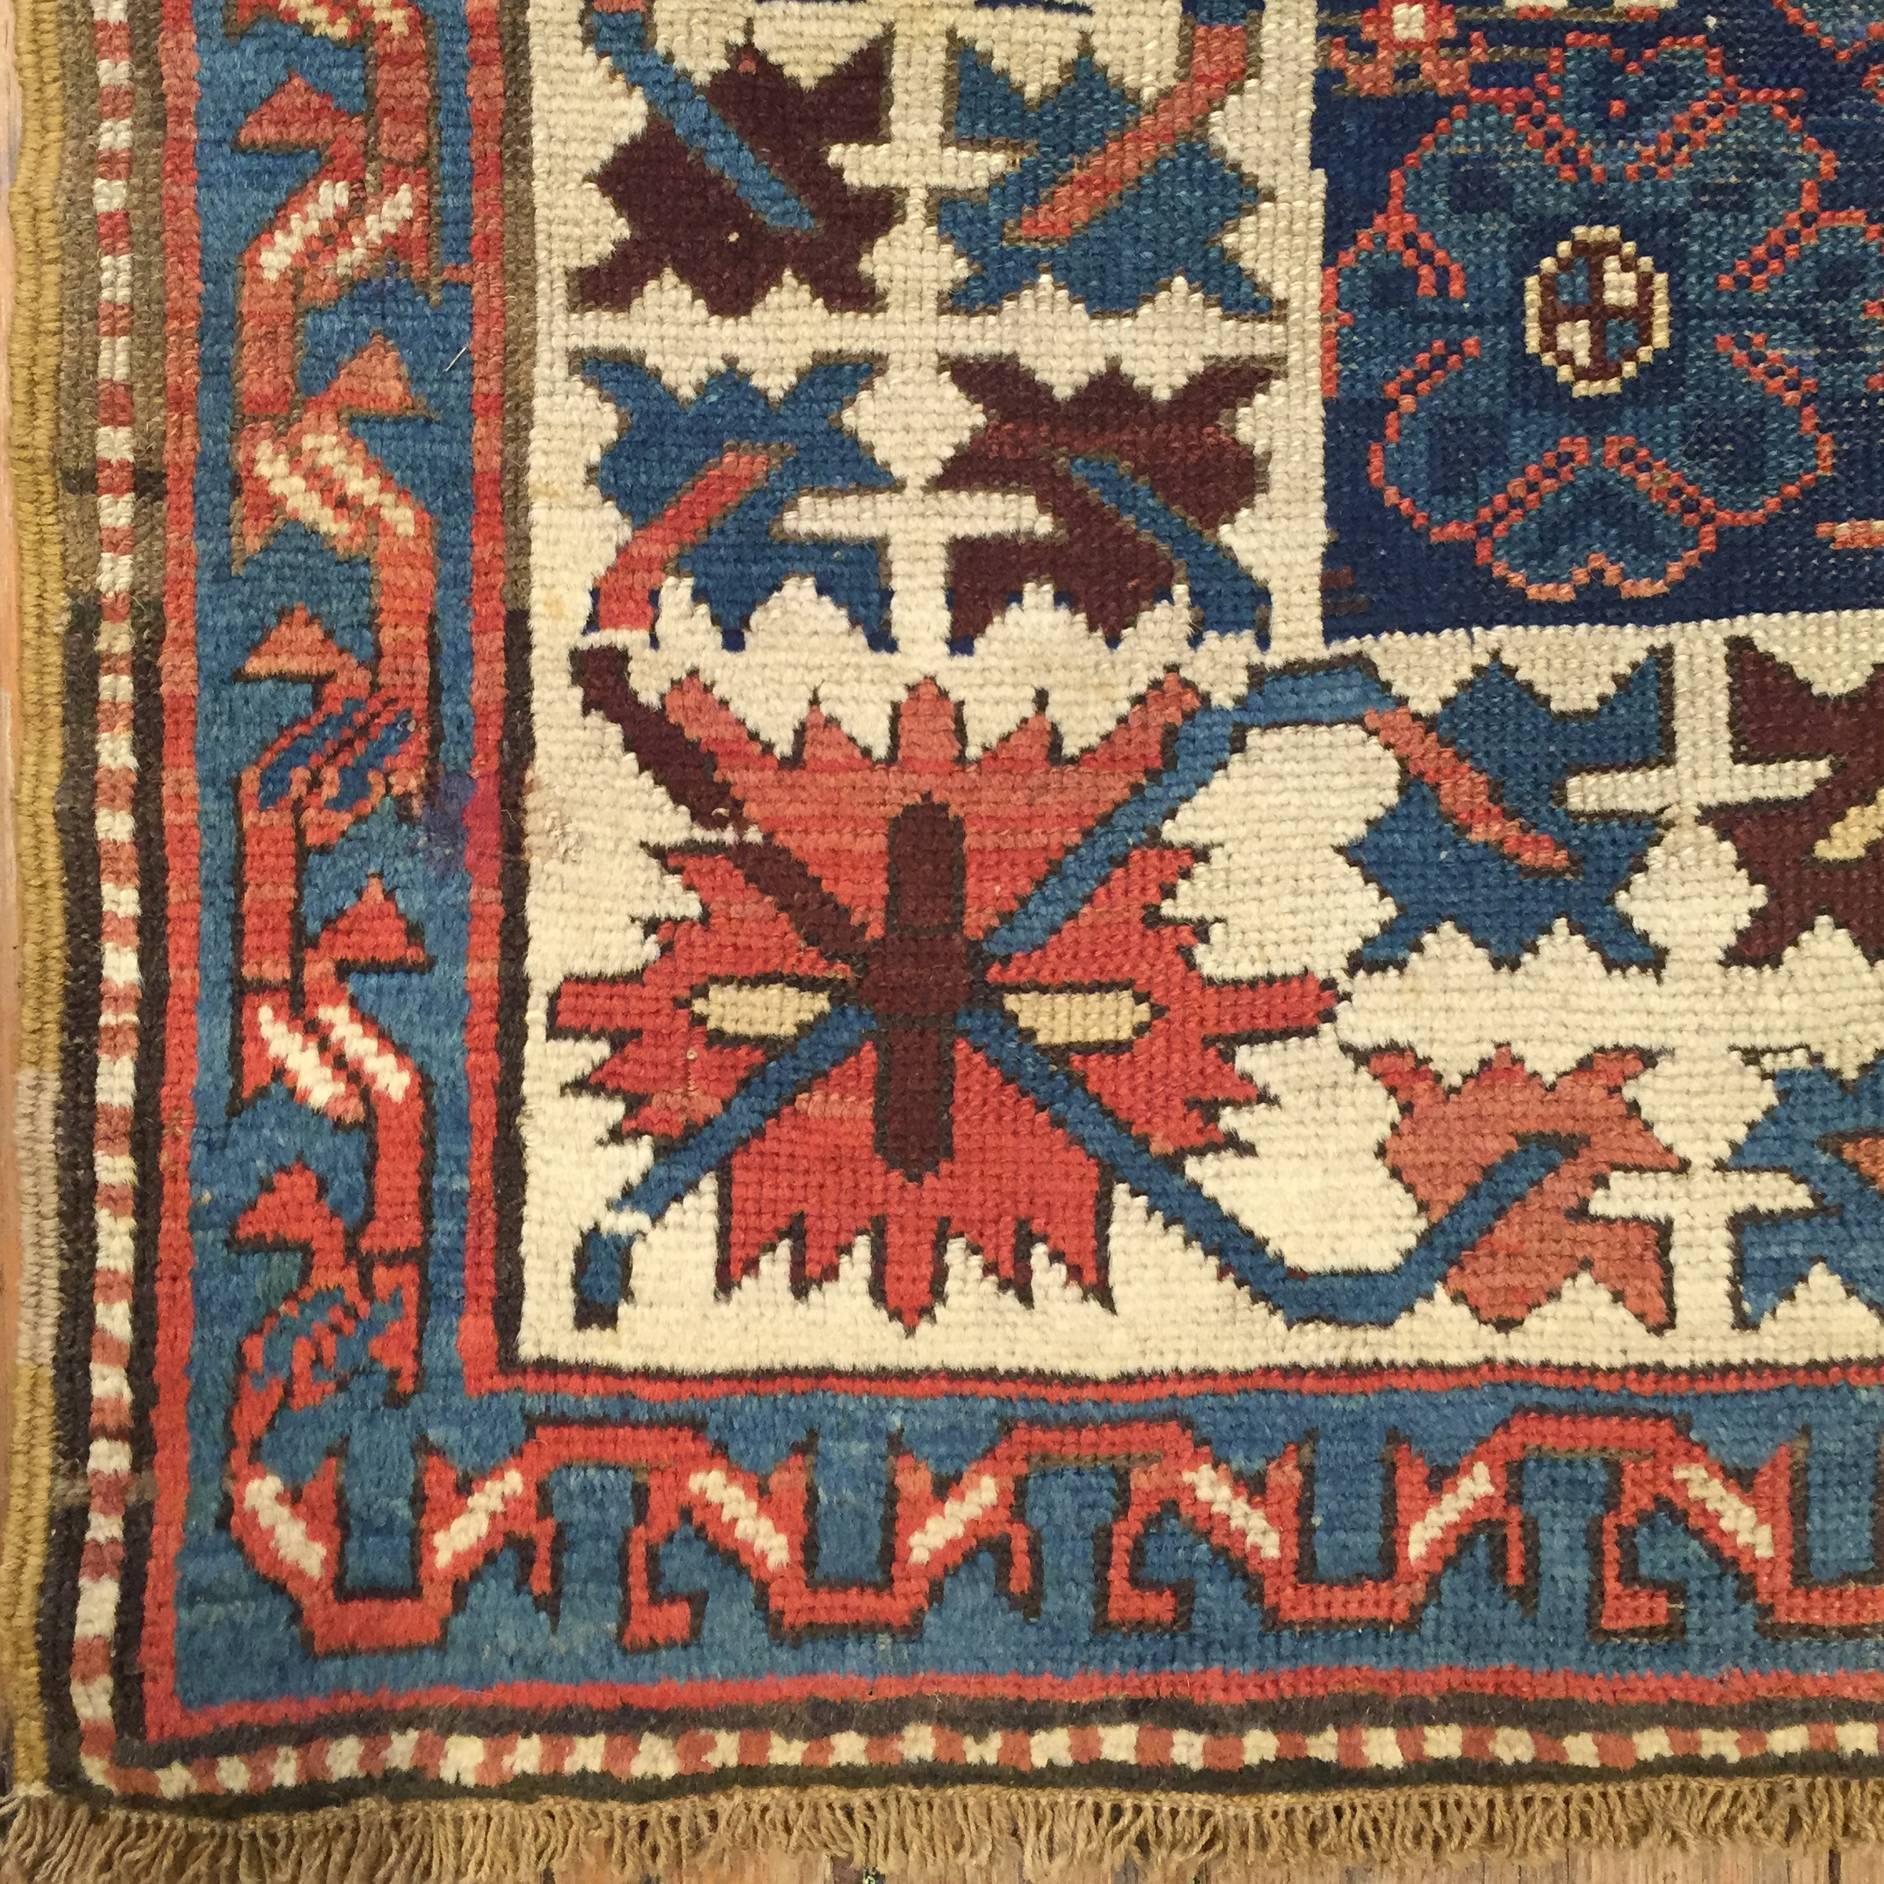 A wonderful late 19th century Persian Shriven runner with six multicolored diamond medallions on an indigo field, surrounded by a large-scale tribal floral border woven in indigo and crimson hues on a white background and a wonderful red scrolling